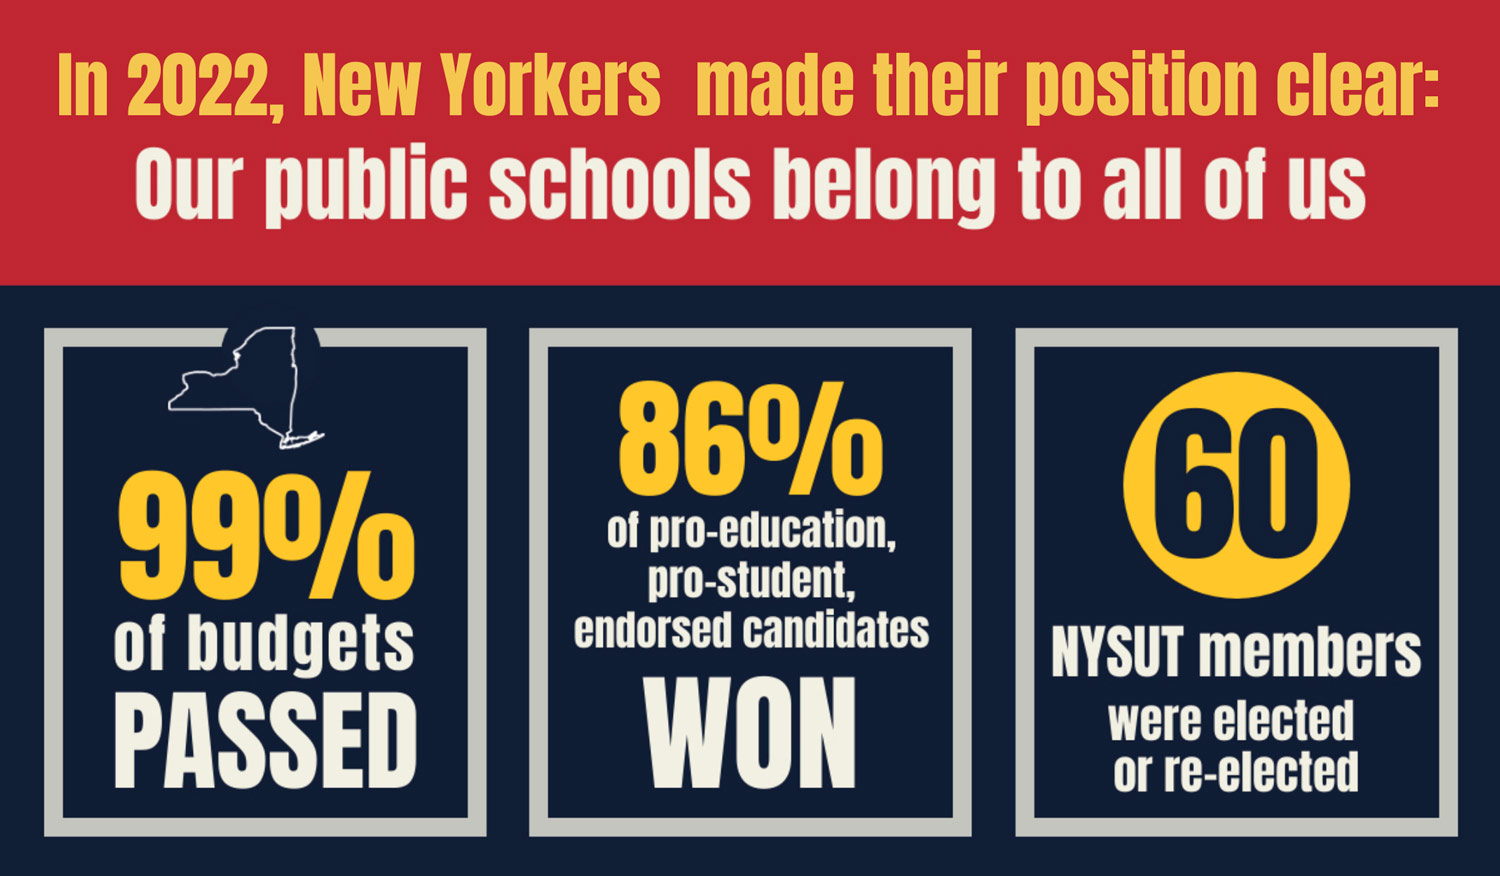 three column statistical red and blue infographic breakdown of legislation topics (99 percent of budgets passed, 86 percent of pro-education, pro-student, endorsed candidates won, 60 NYSUT members were elected or re-elected) in New York public schools in 2022